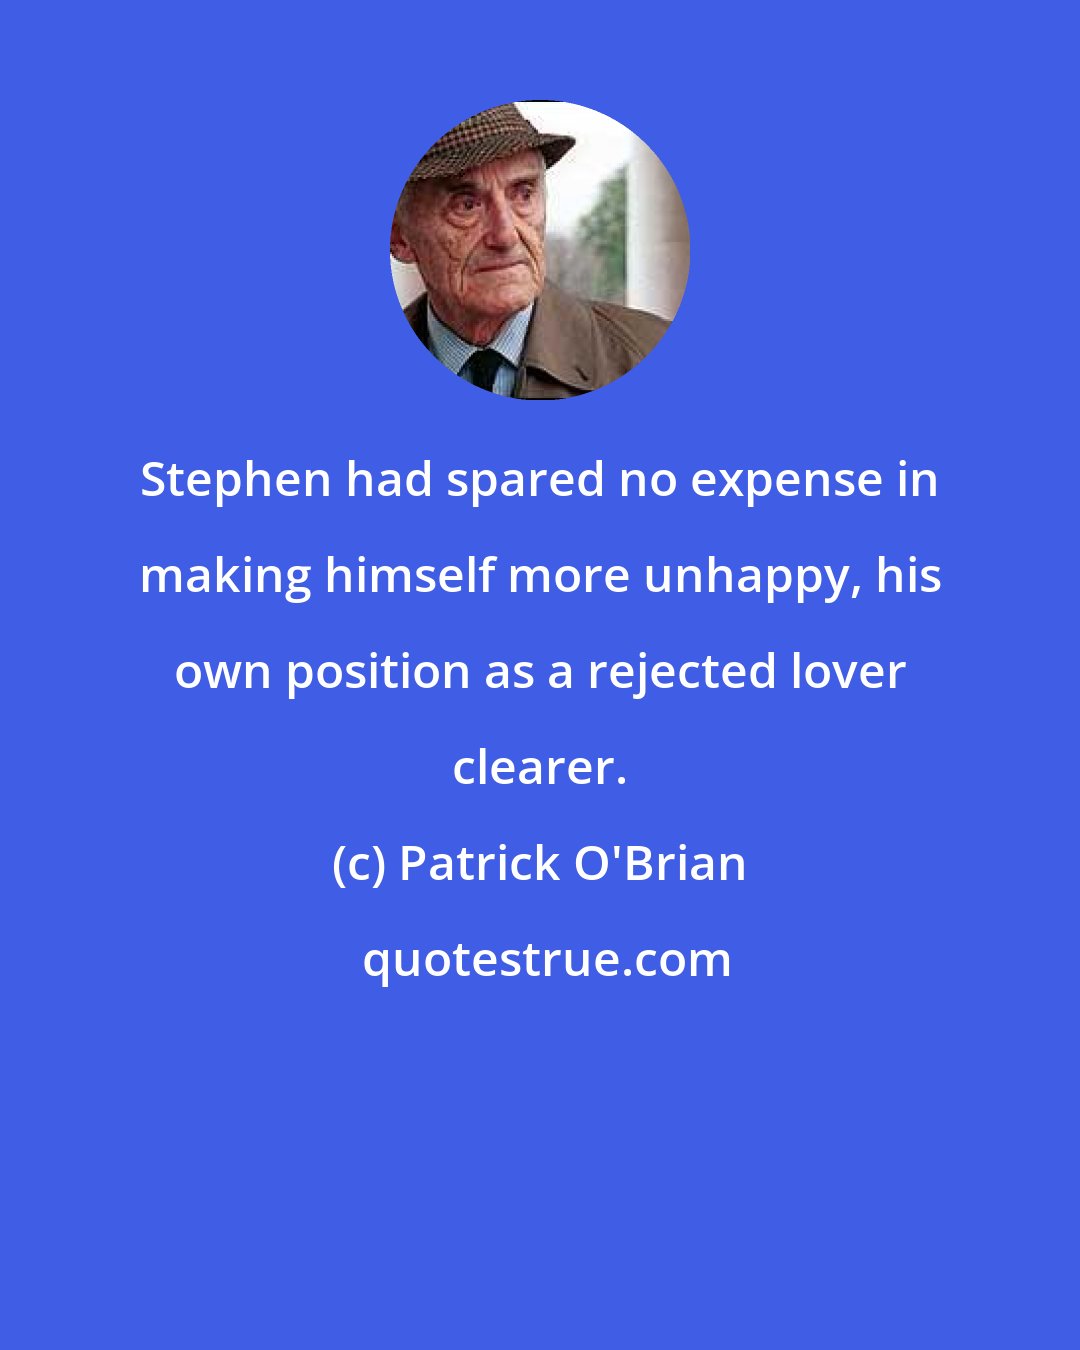 Patrick O'Brian: Stephen had spared no expense in making himself more unhappy, his own position as a rejected lover clearer.